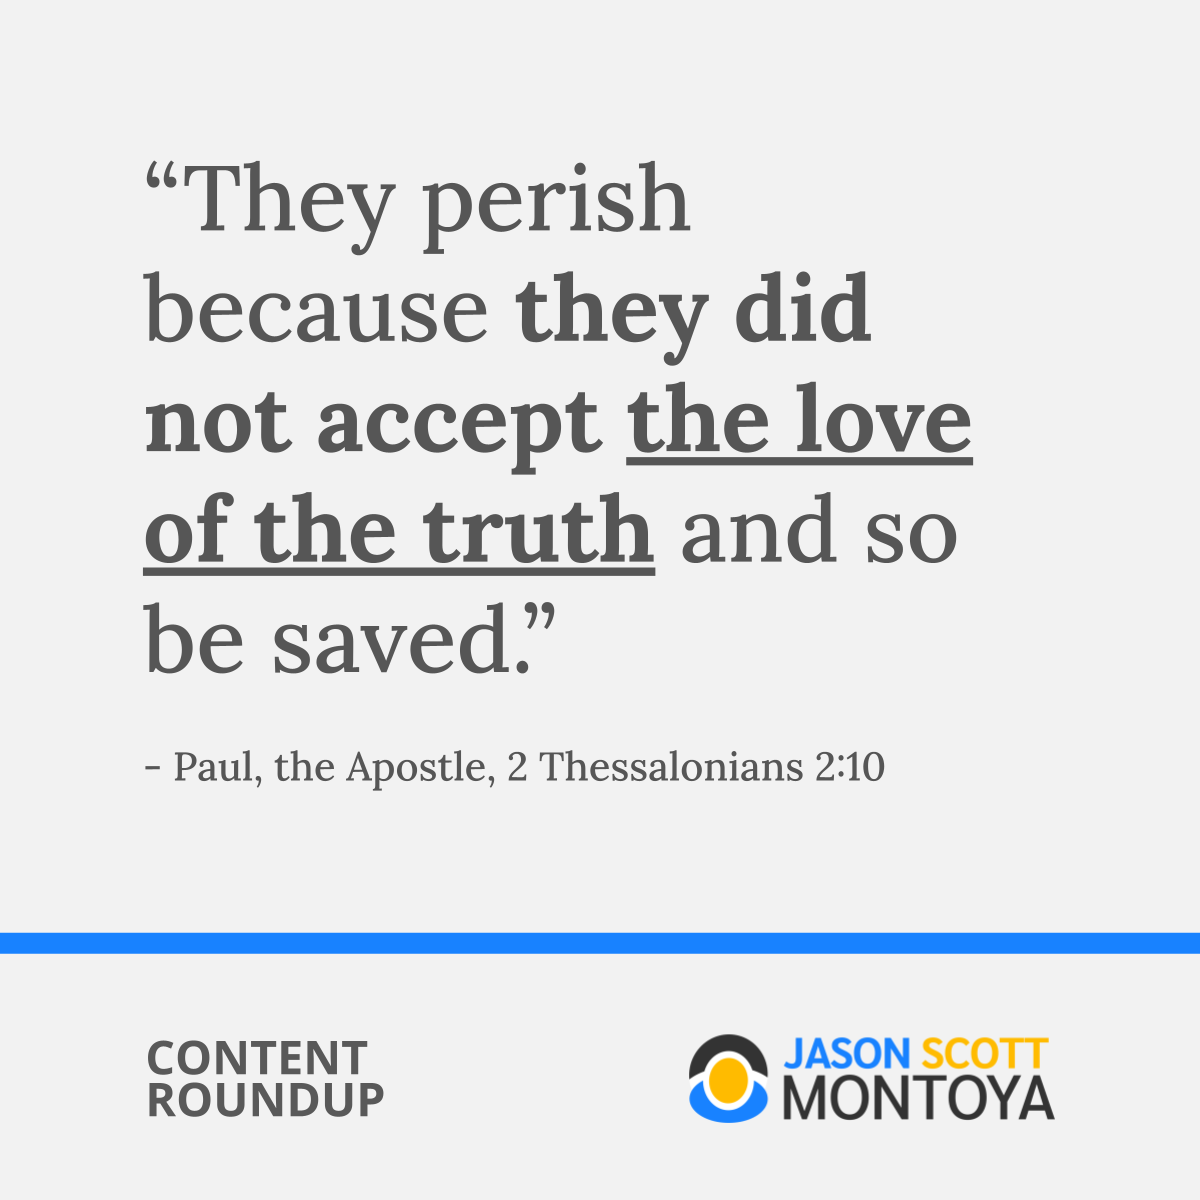 “They perish because they did not accept the love of the truth and so be saved.”   - Paul, the Apostle, 2 Thessalonians 2:10